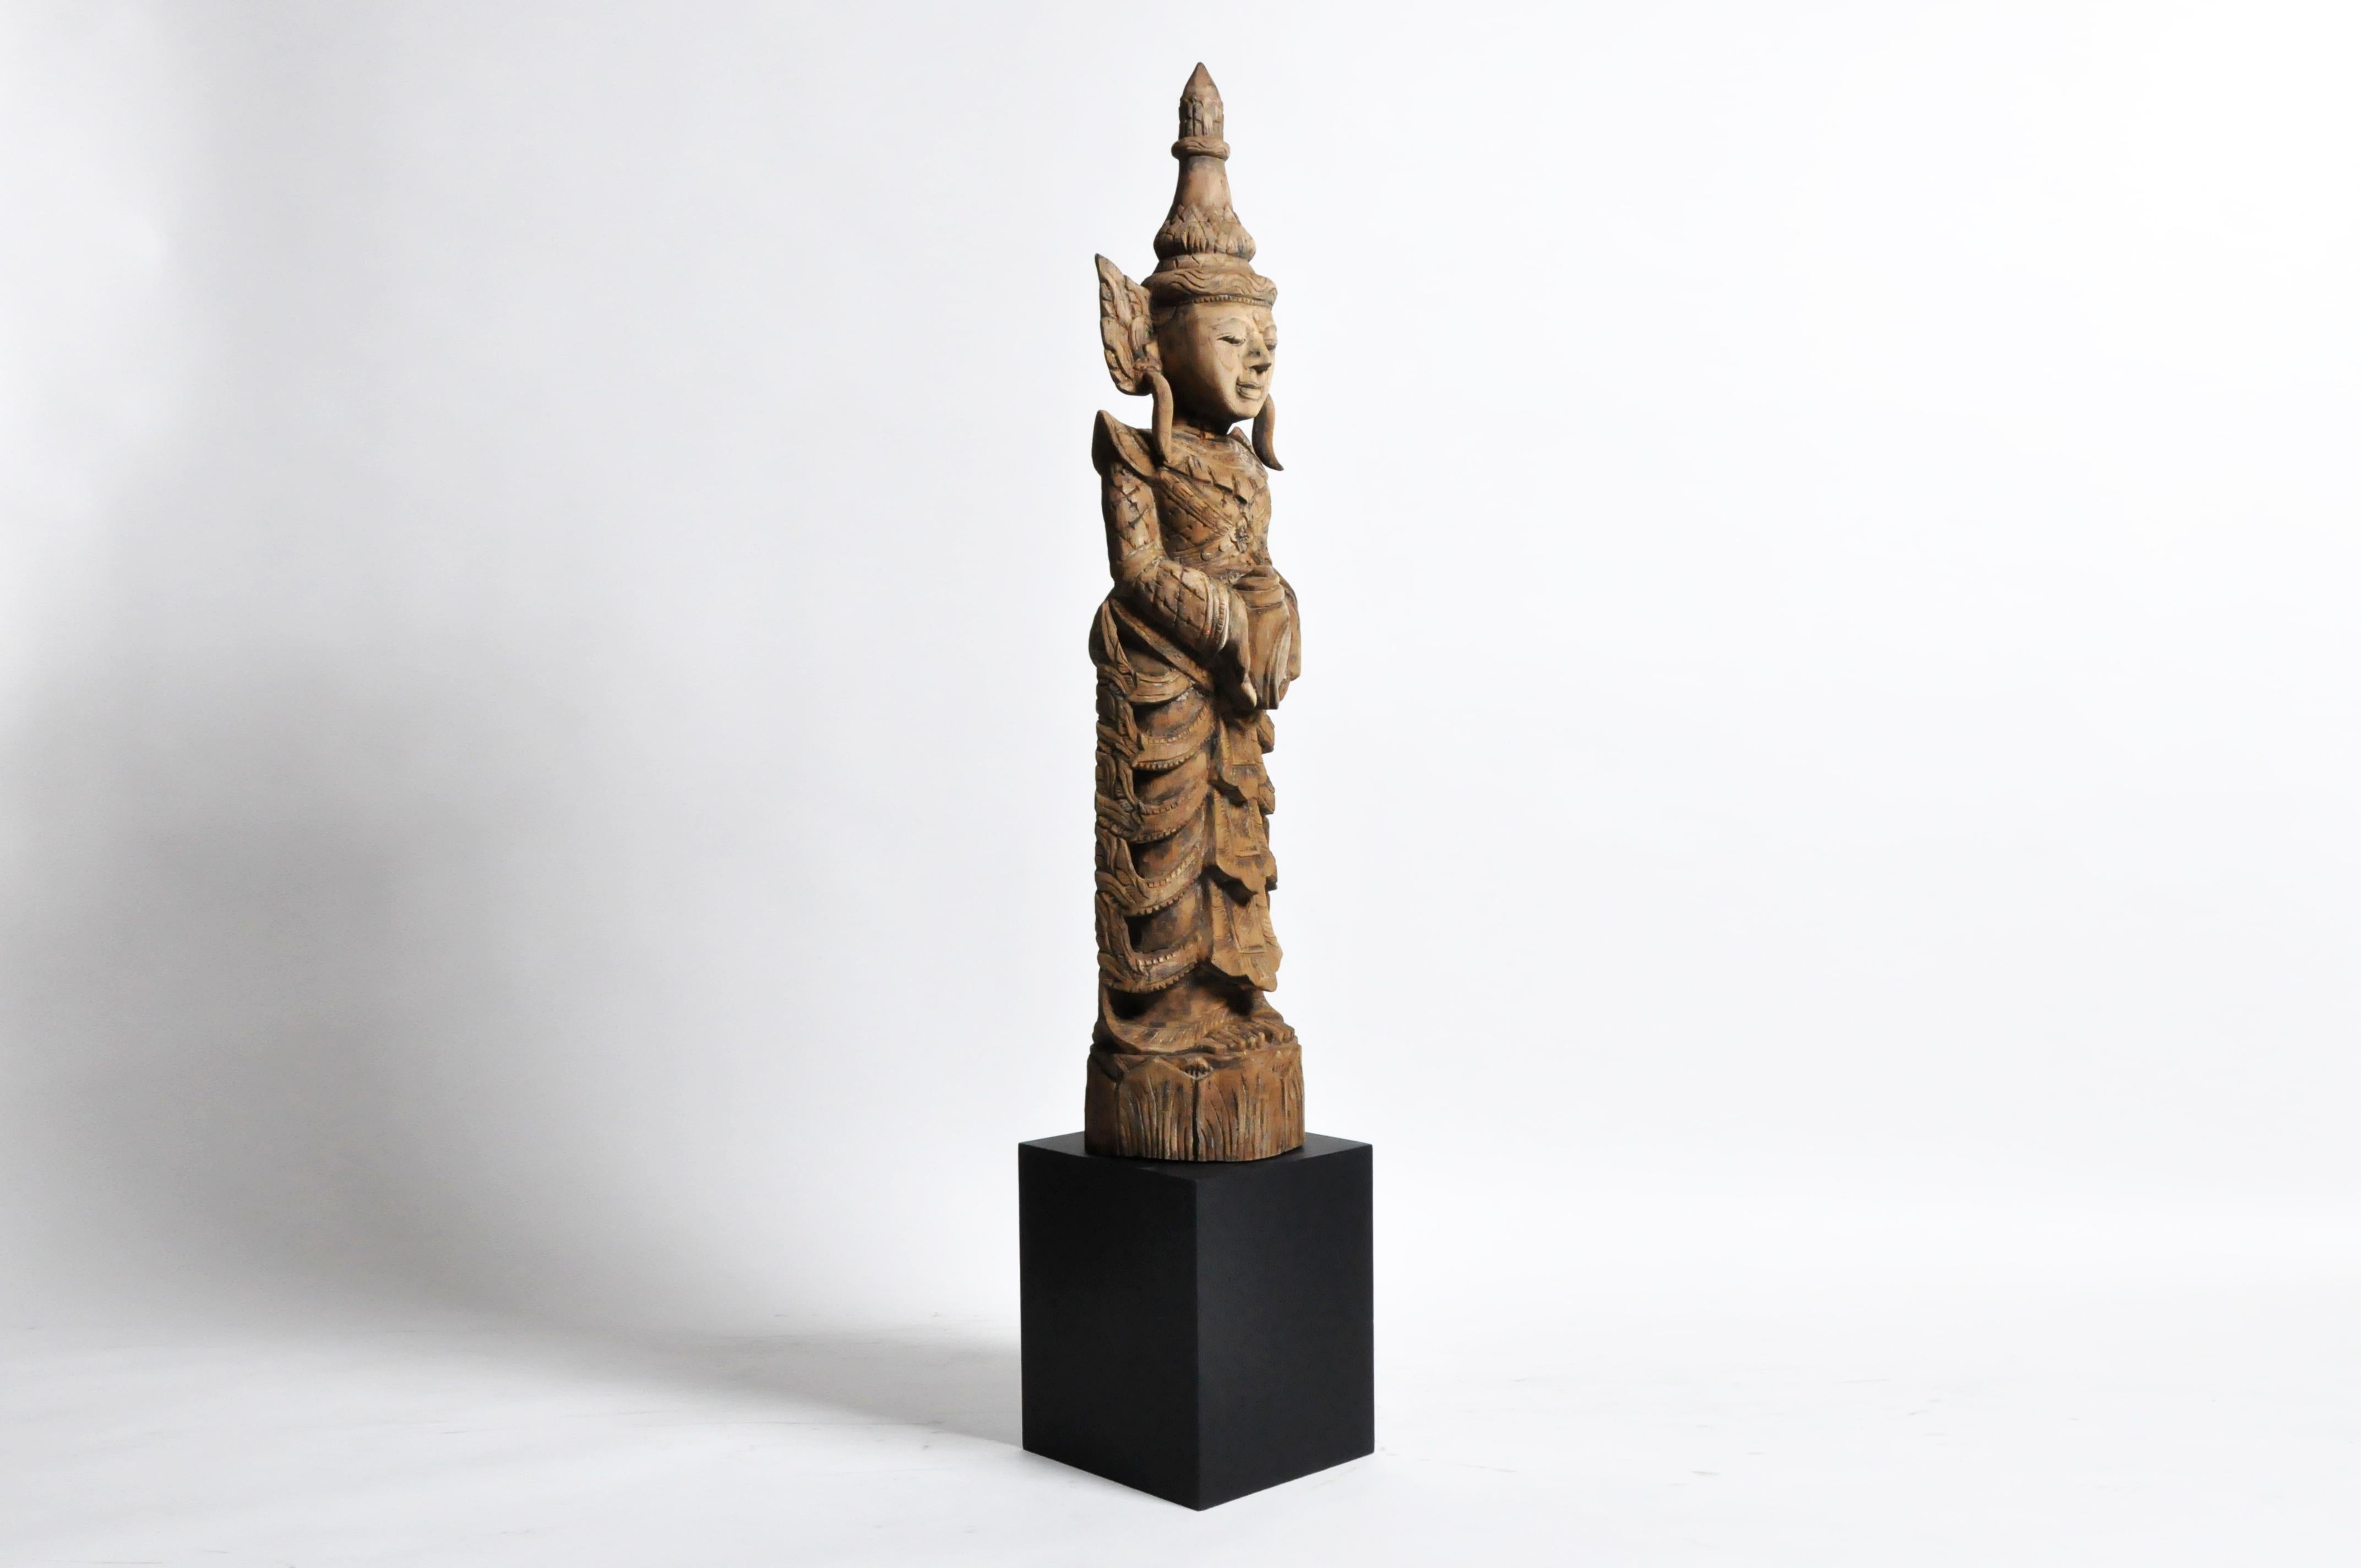 This beautiful greeting angel is from Thailand and is made from teak wood. This type of angel holds its hands clasped together in a respectful wai and wears a heavenly costume decorated with pointed winglets and a draped skirt. According to